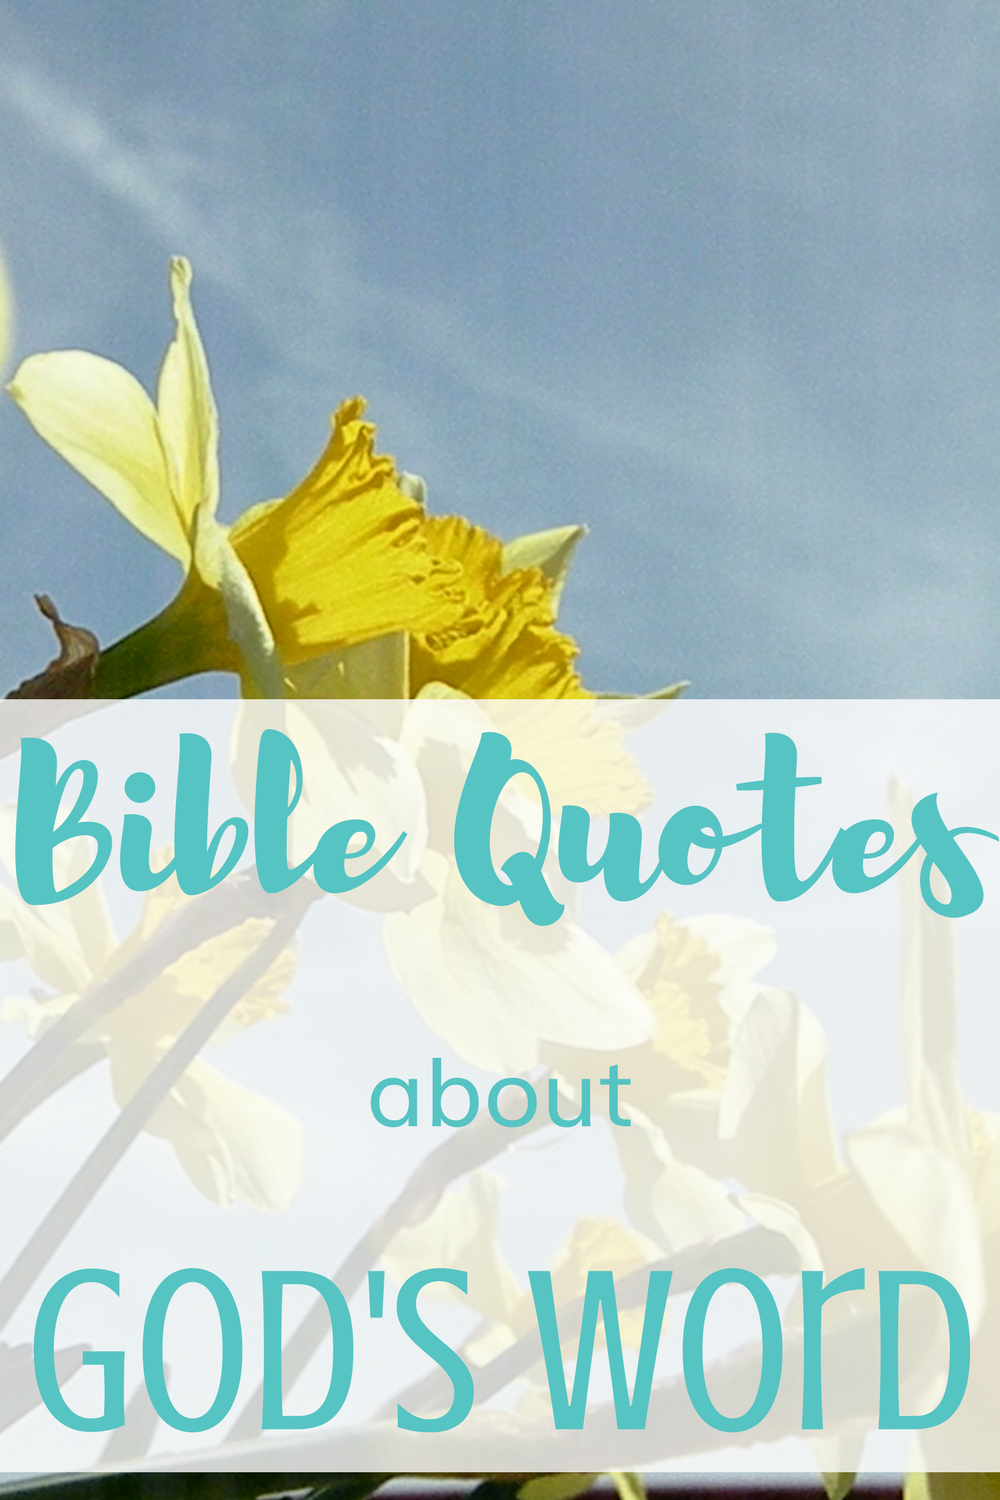 Bible quotes about God's Word for Christians